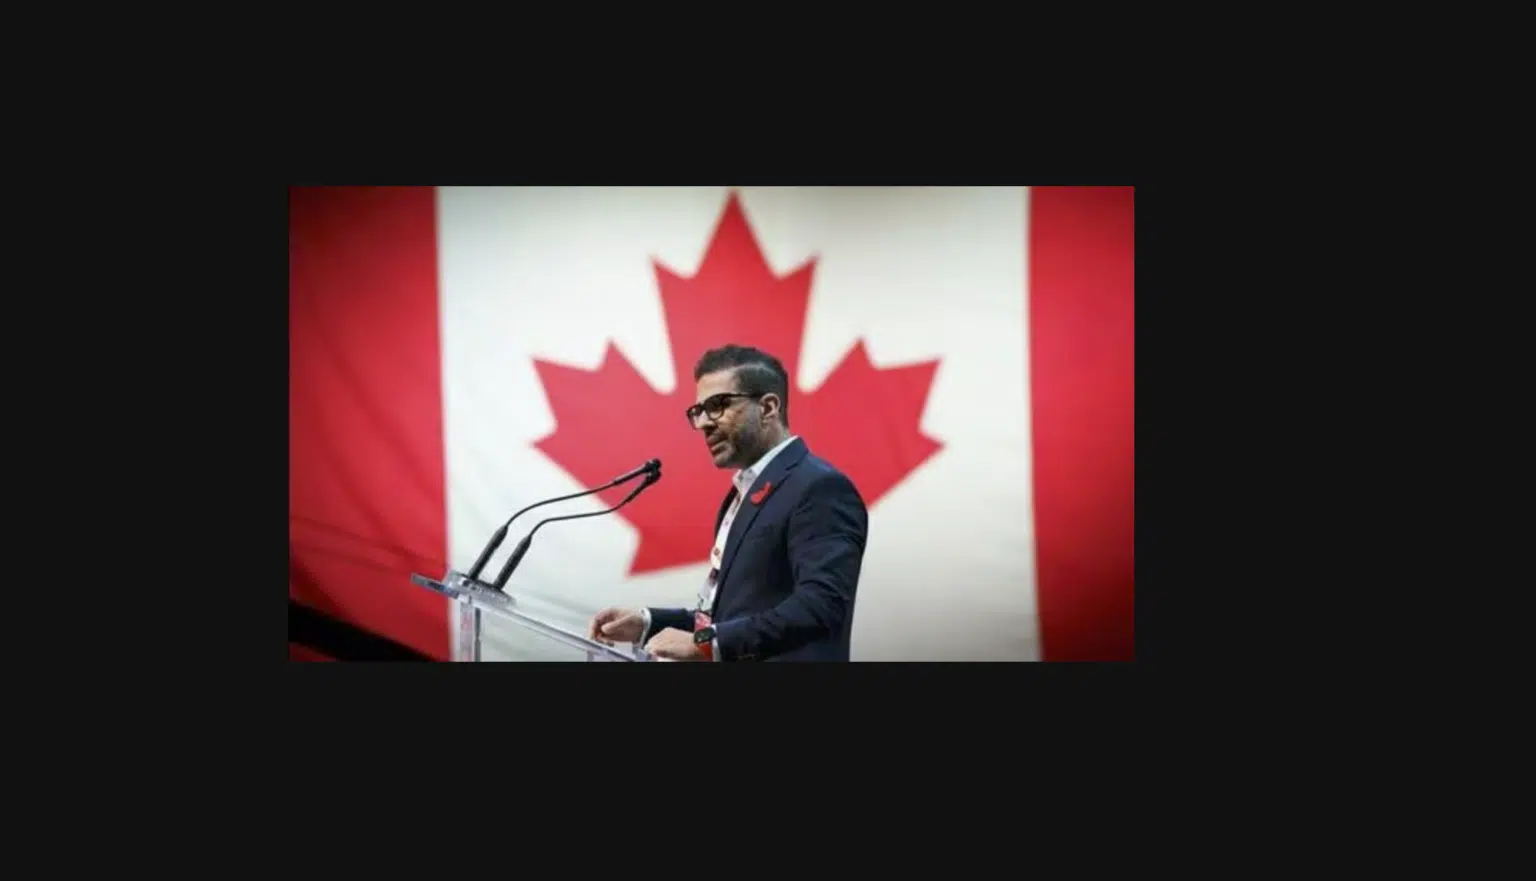 Election of Sachit Mehra: New Era for Indo-Canadians? - Asiana Times